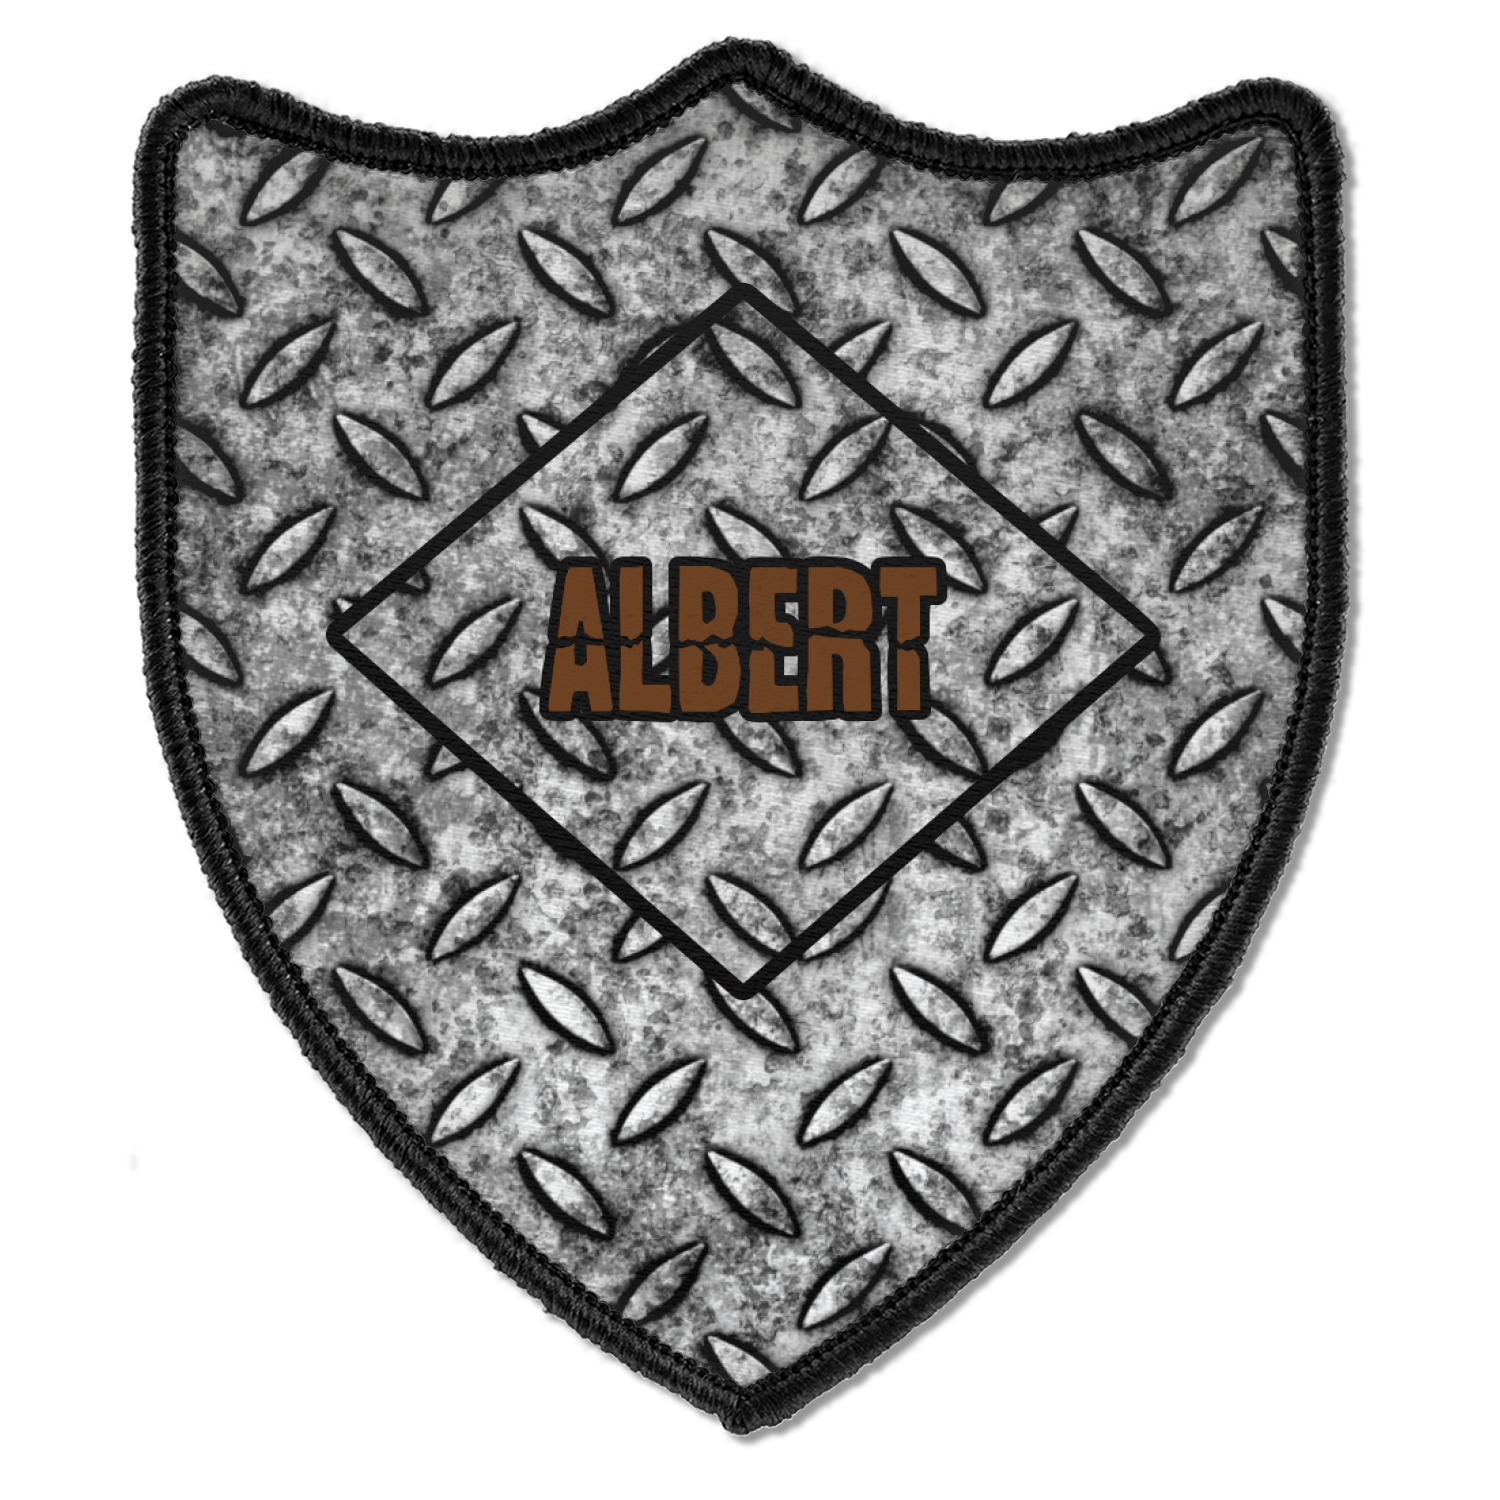 Metal Clothes Patches! Custom patch with metal plates for denim